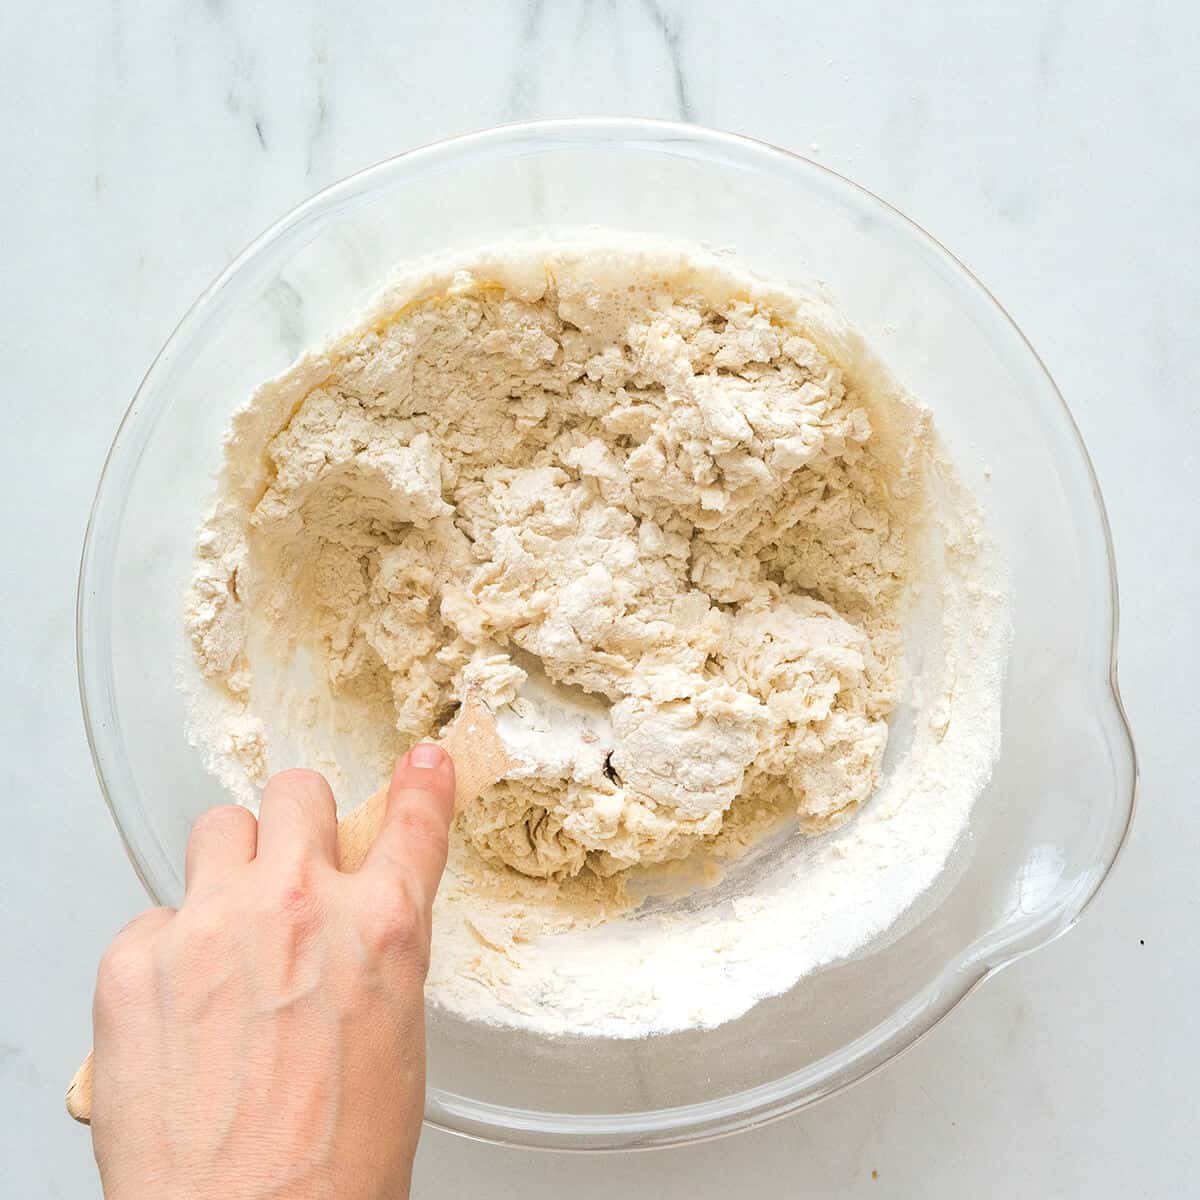 Mixing proofed yeast with flour.